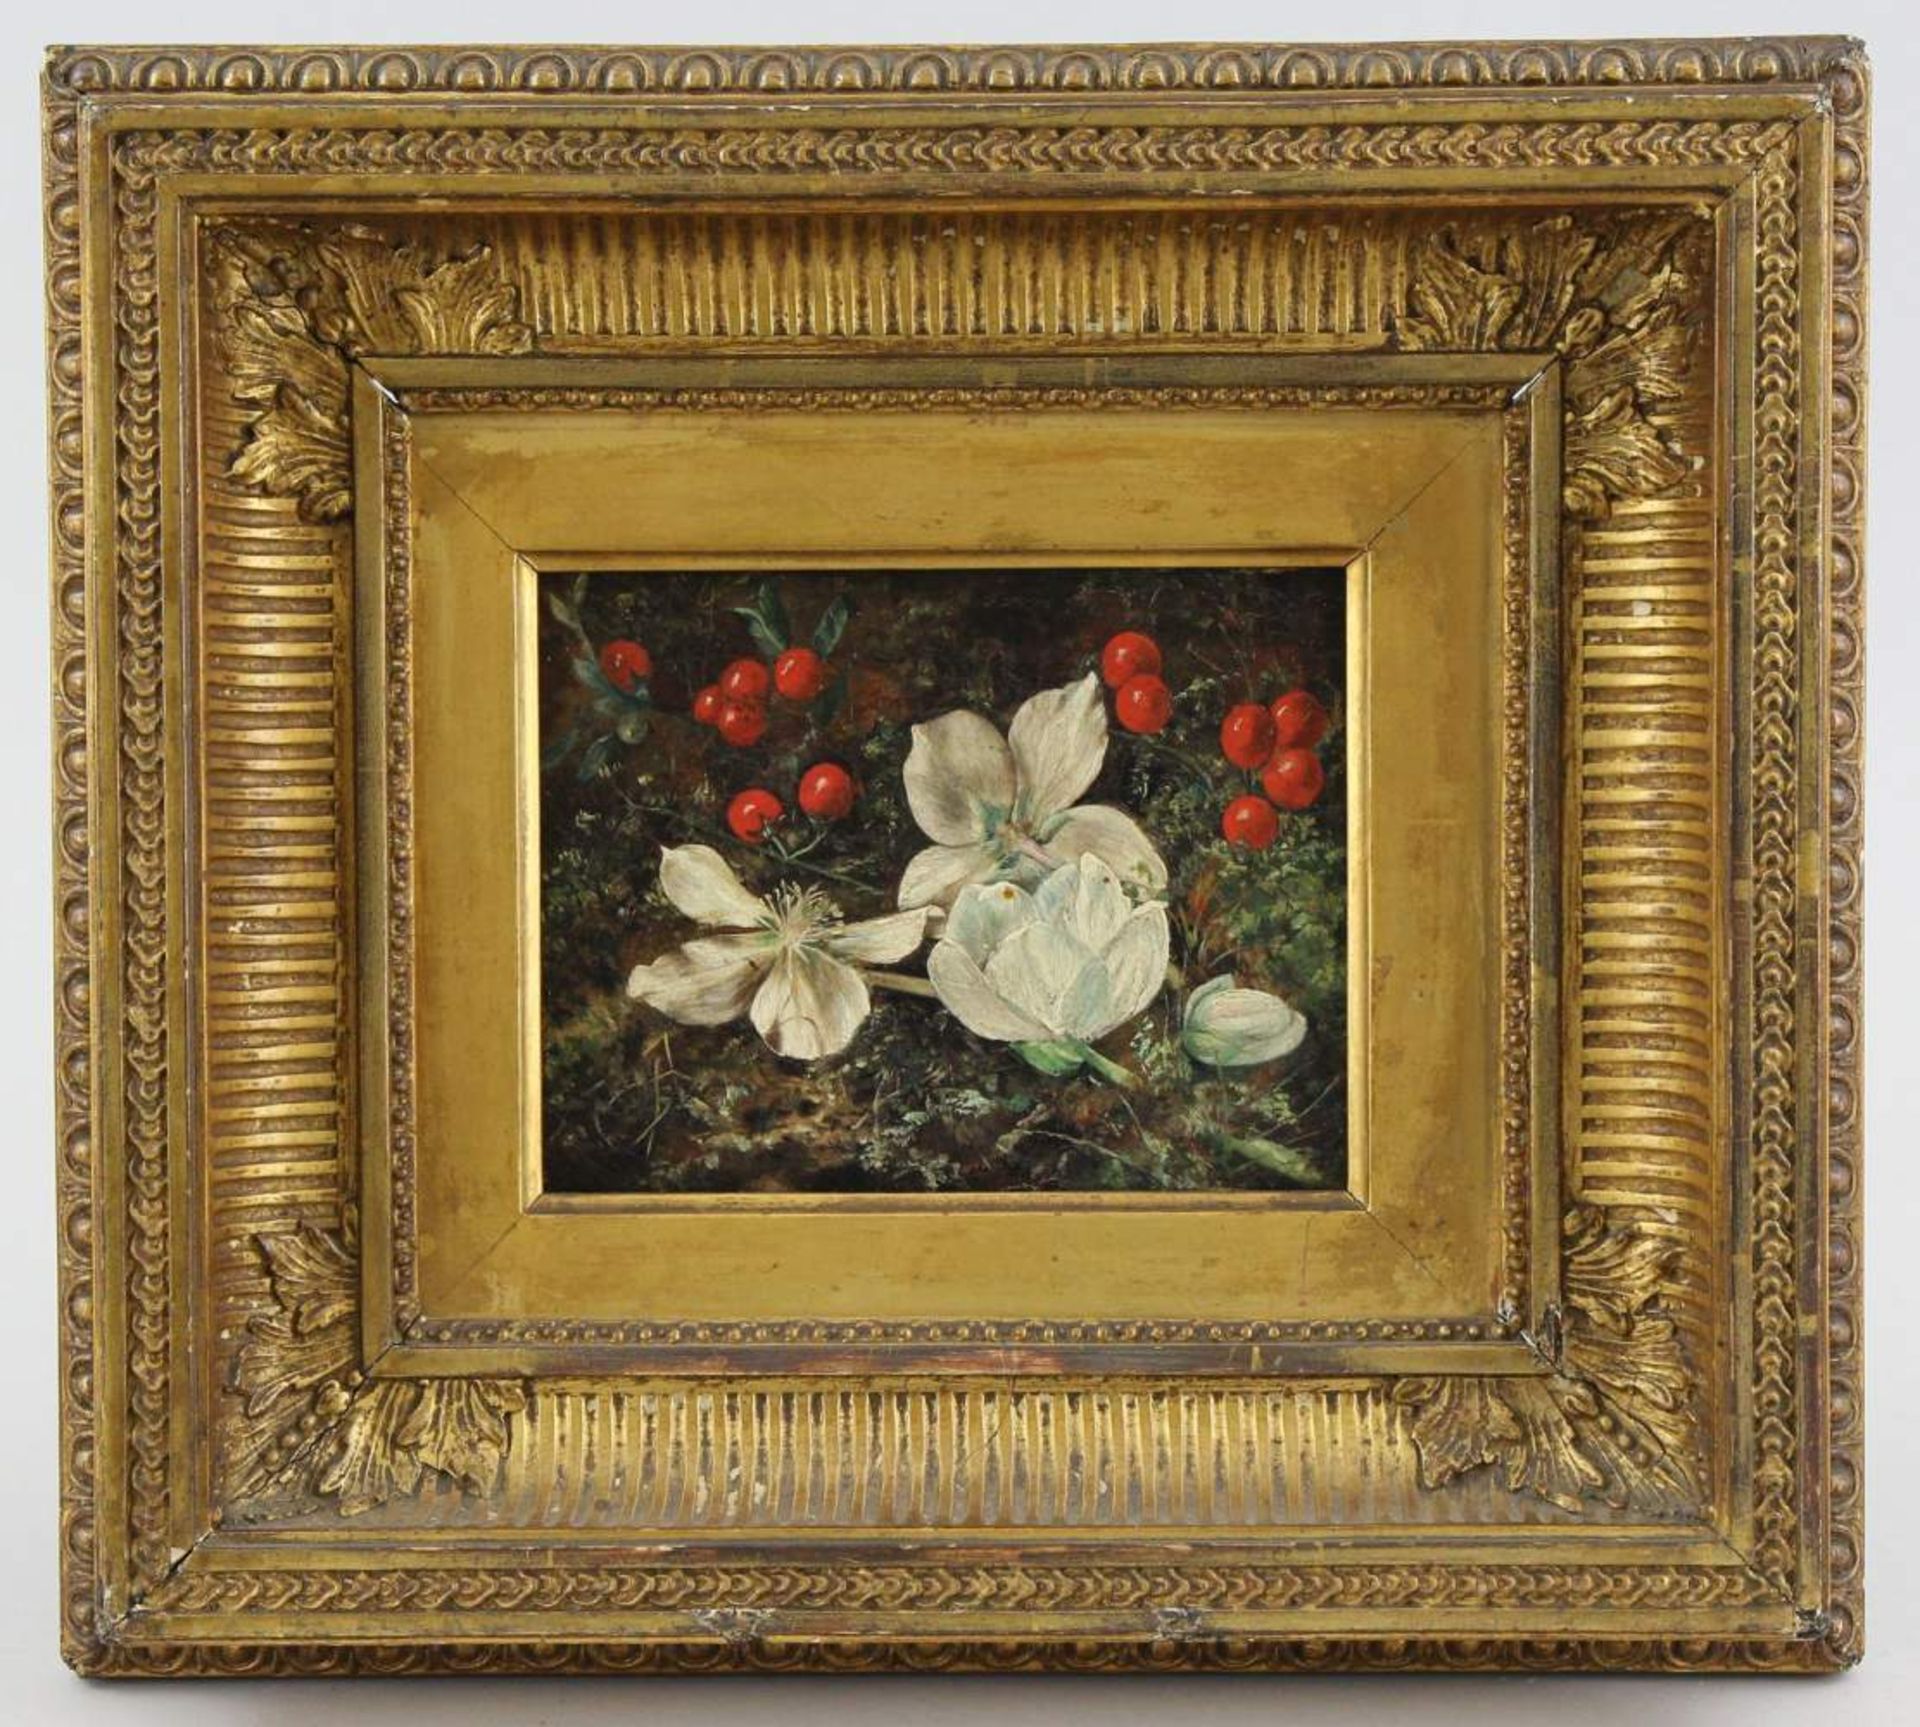 British 19th century painter Painting, oil on canvas, still life with flowers, not signed, 15.5 x